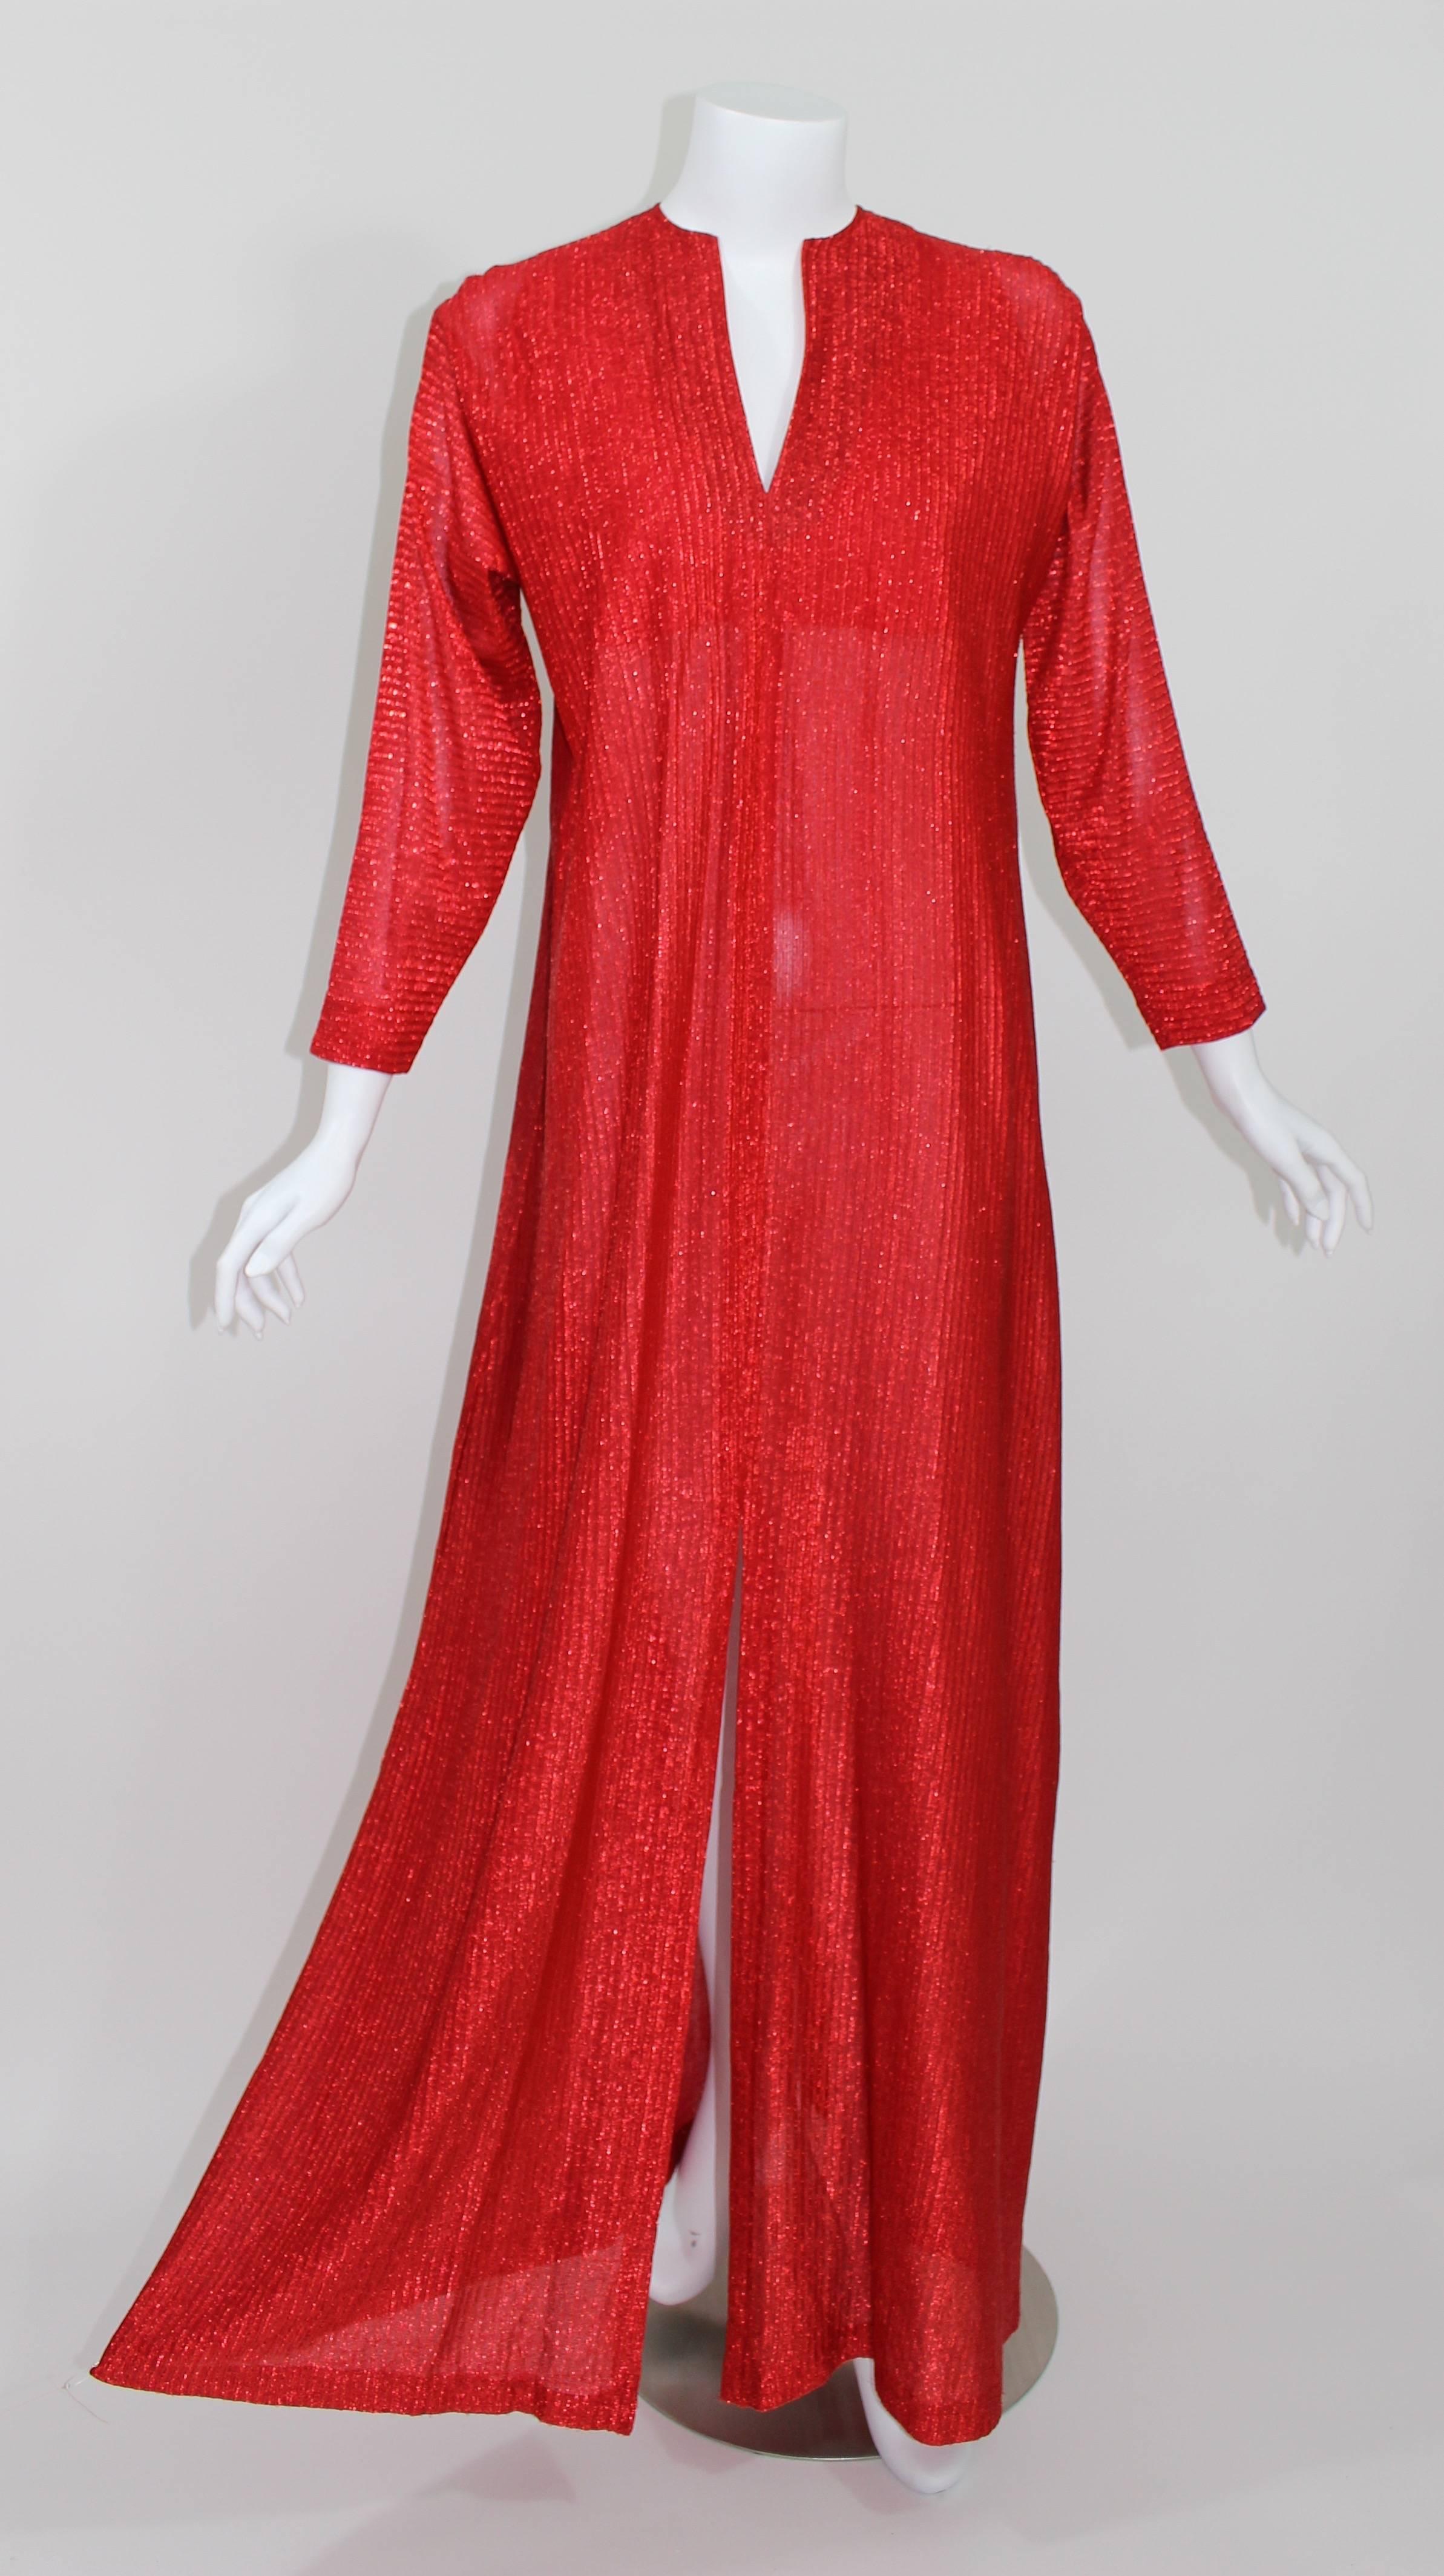 Halston was one of the most influential American designers of the 20th century. His easy, yet elegant styles embodied the clean and unfettered look of the modern woman. This metallic red caftan beautifully illustrates his prescient understanding of